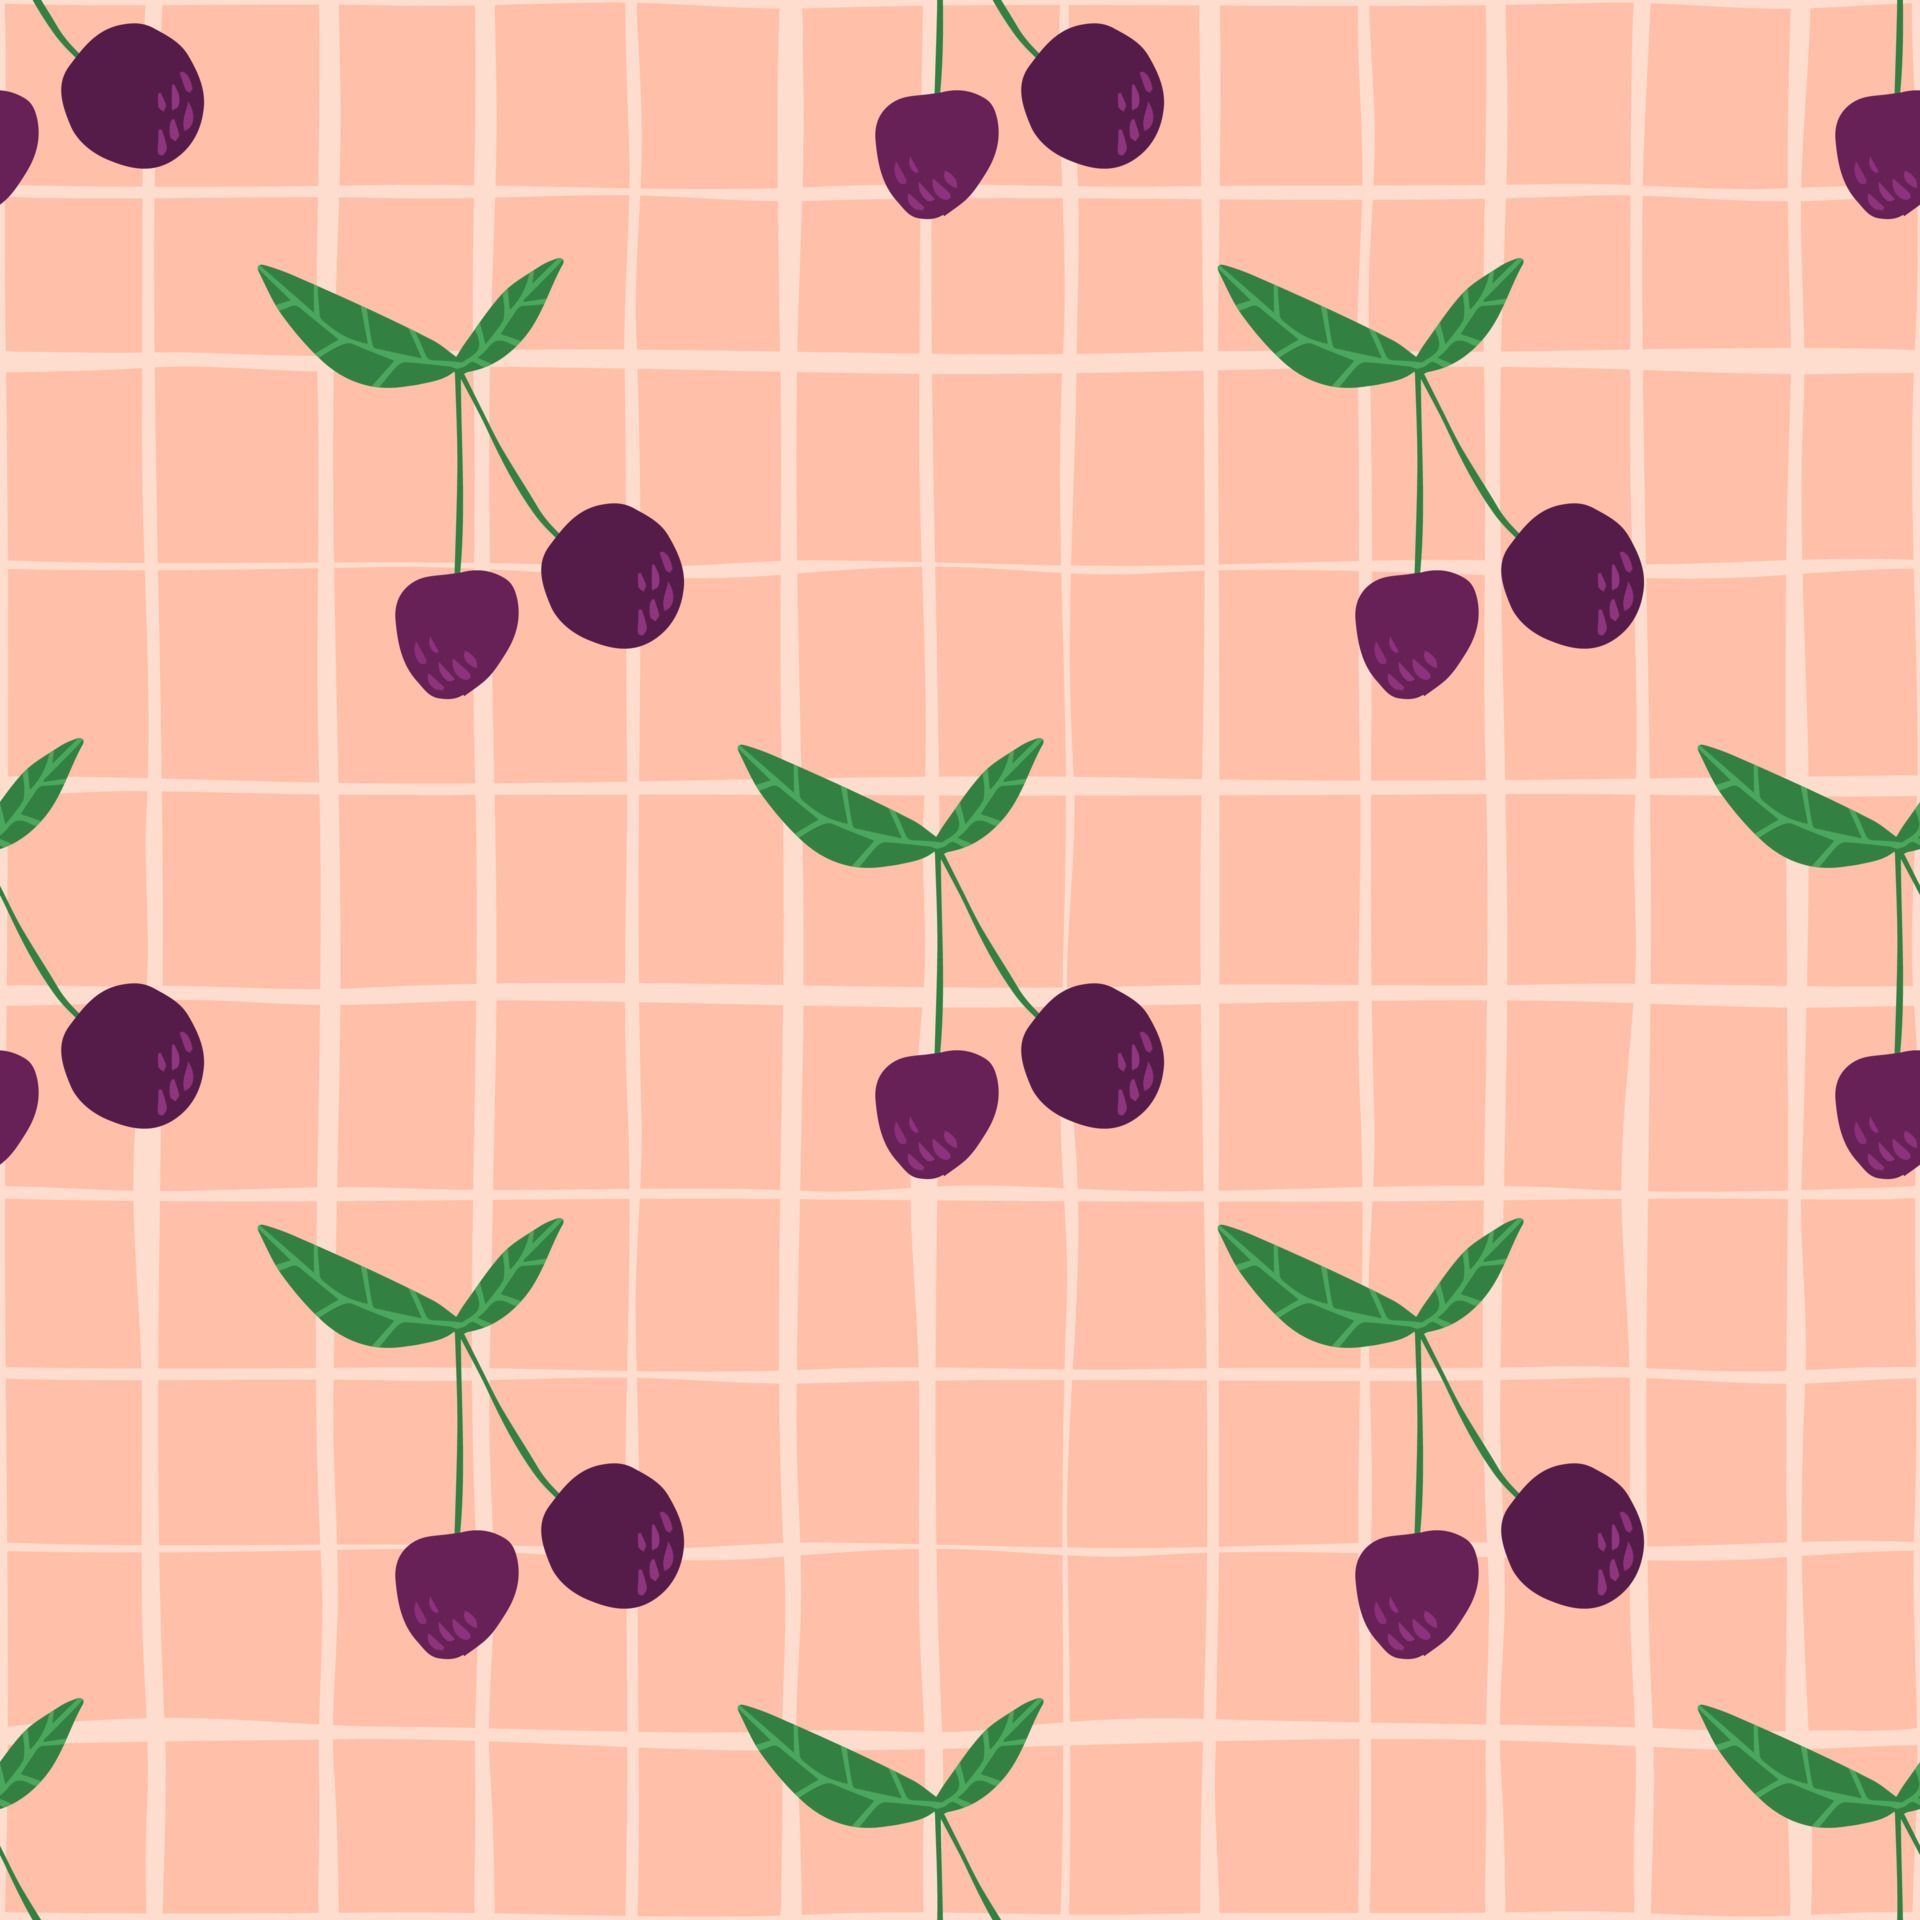 Cherry seamless pattern for fabric design. Cherries wallpaper on stripes background